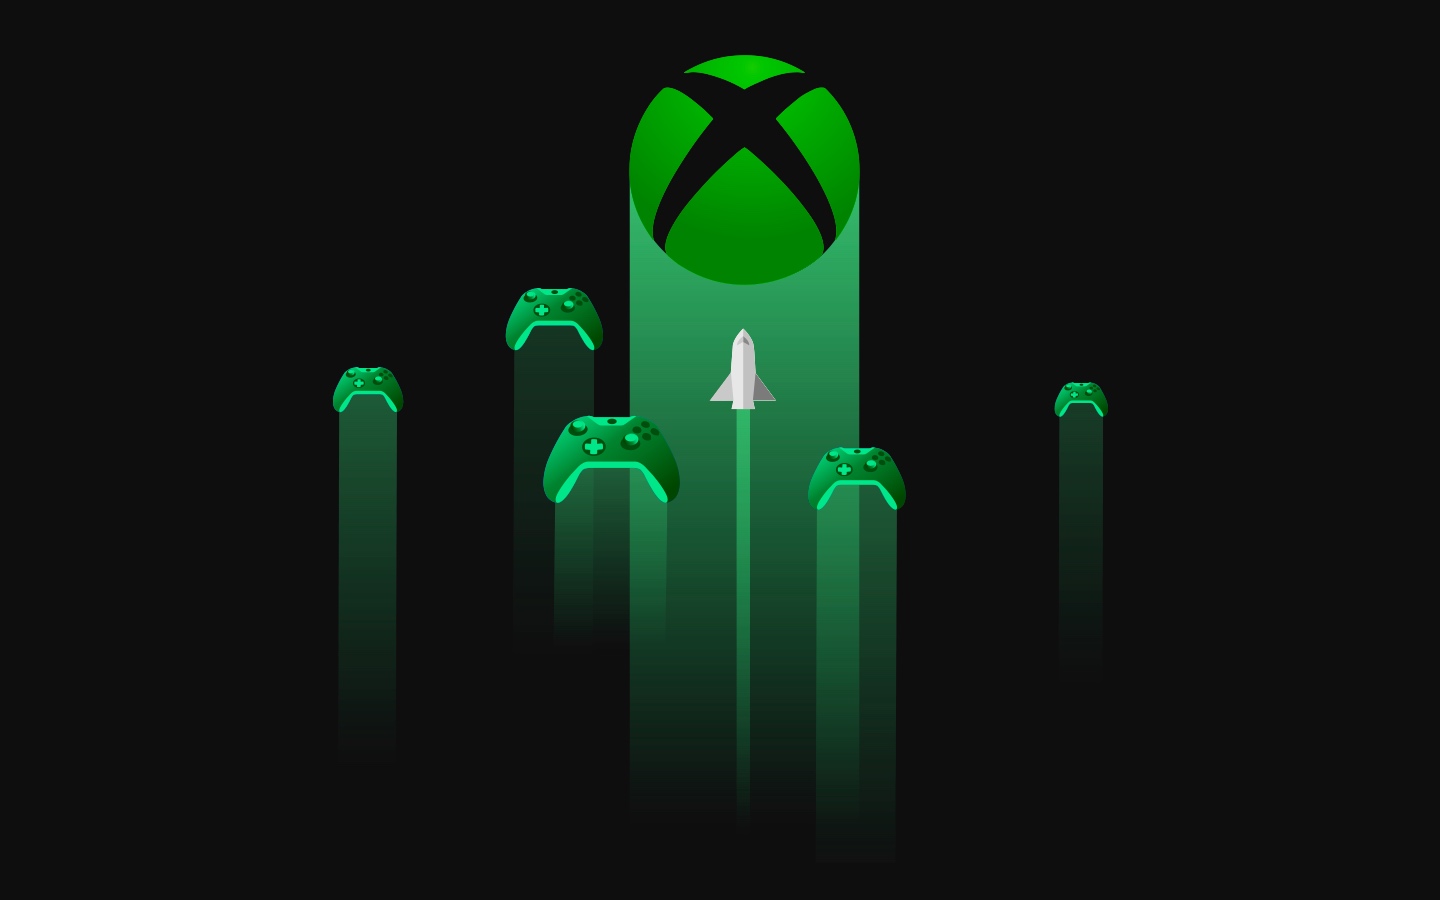 artwork for Project xCloud featuring the Xbox logo and Xbox controllers